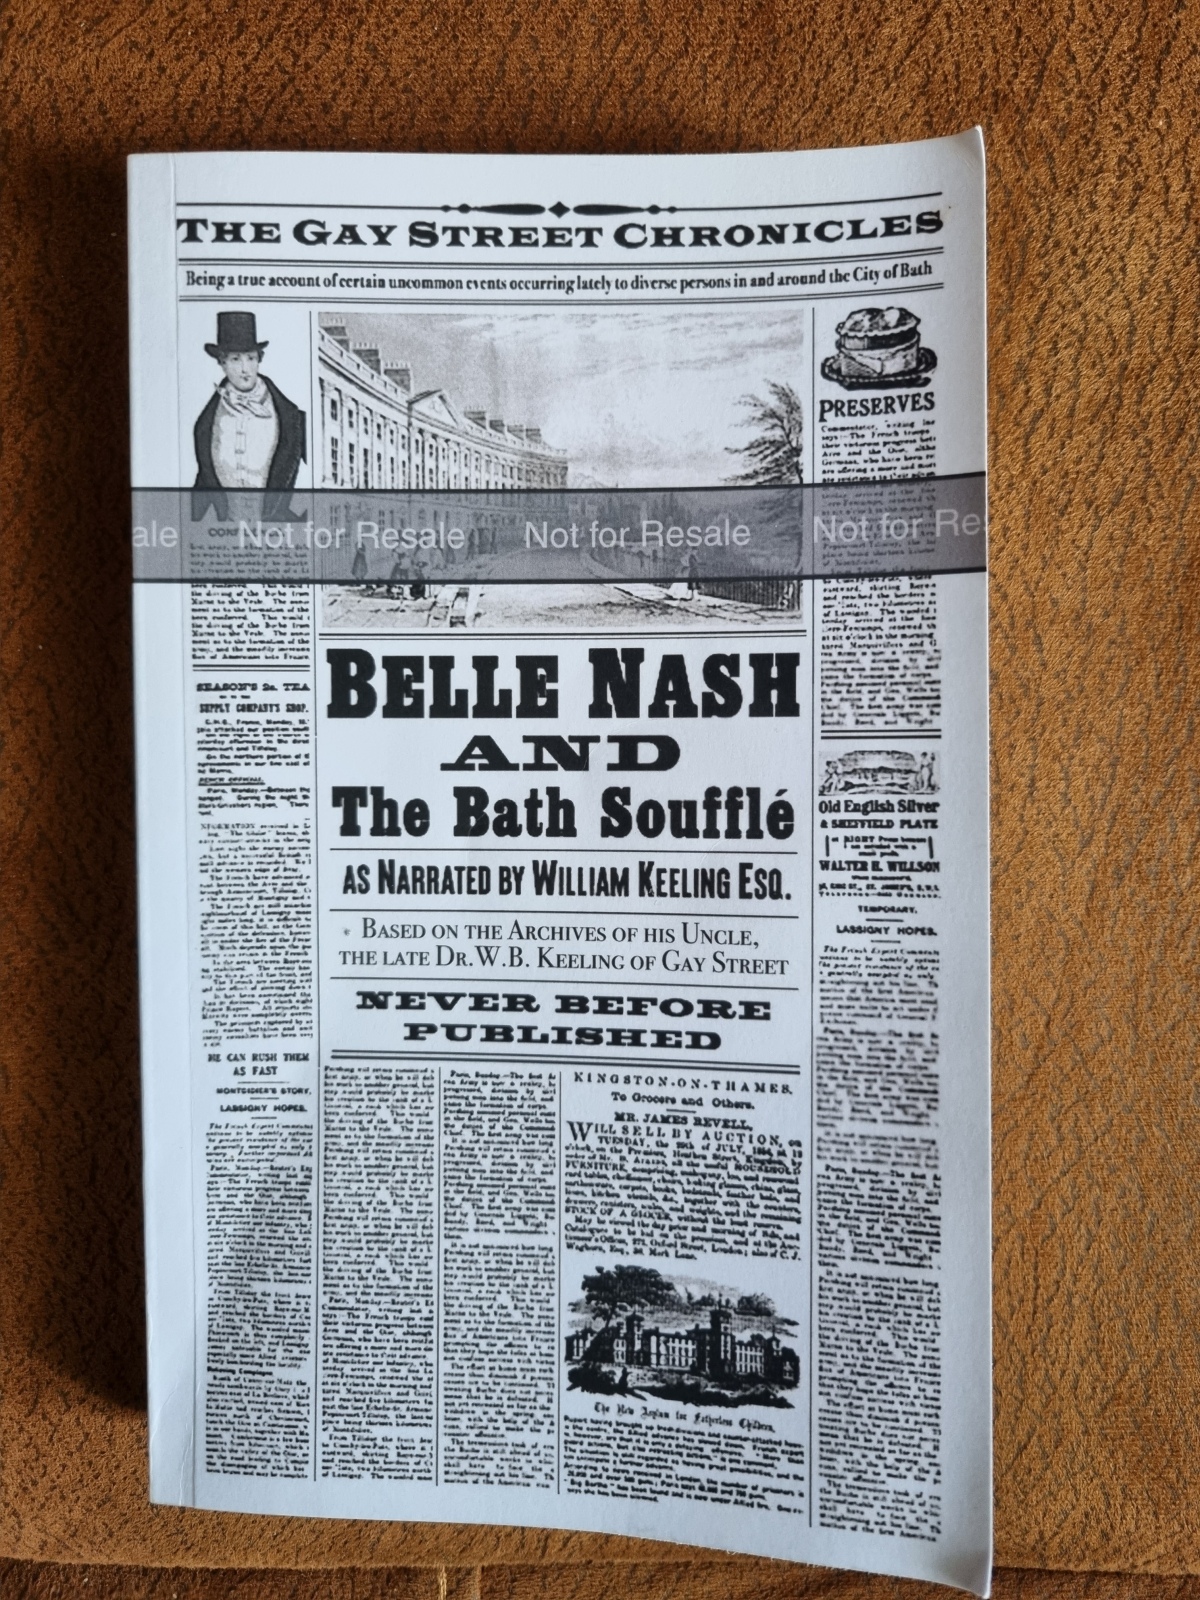 The Gay Street Chronicles: Belle Nash and The Bath Souffle.